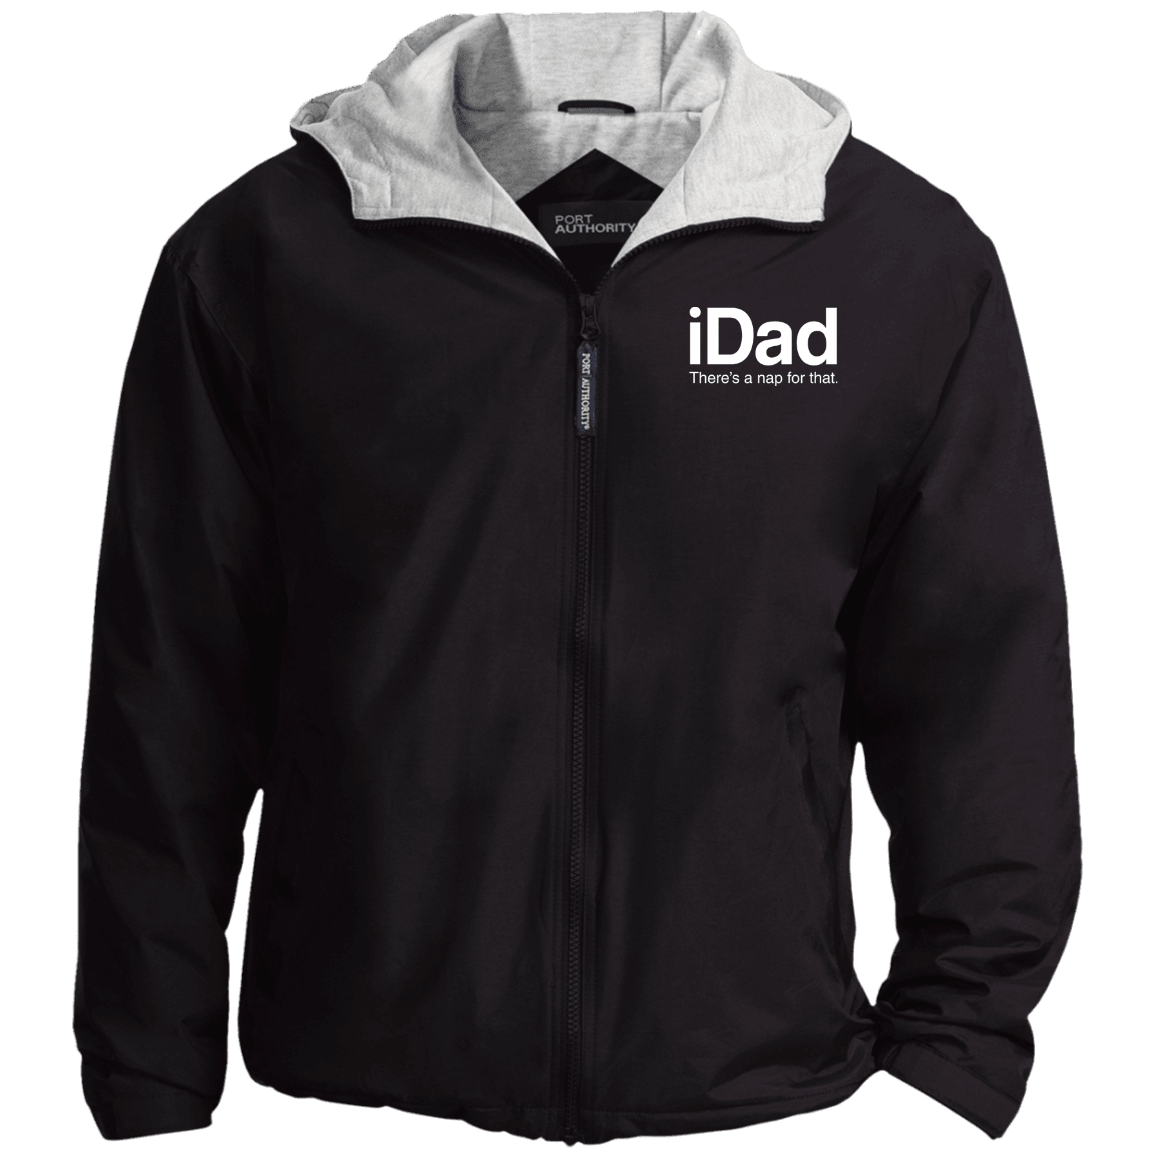 Designs by MyUtopia Shout Out:iDad There's a Nap For That Embroidered Port Authority Team Jacket,Black/Light Oxford / X-Small,Jackets